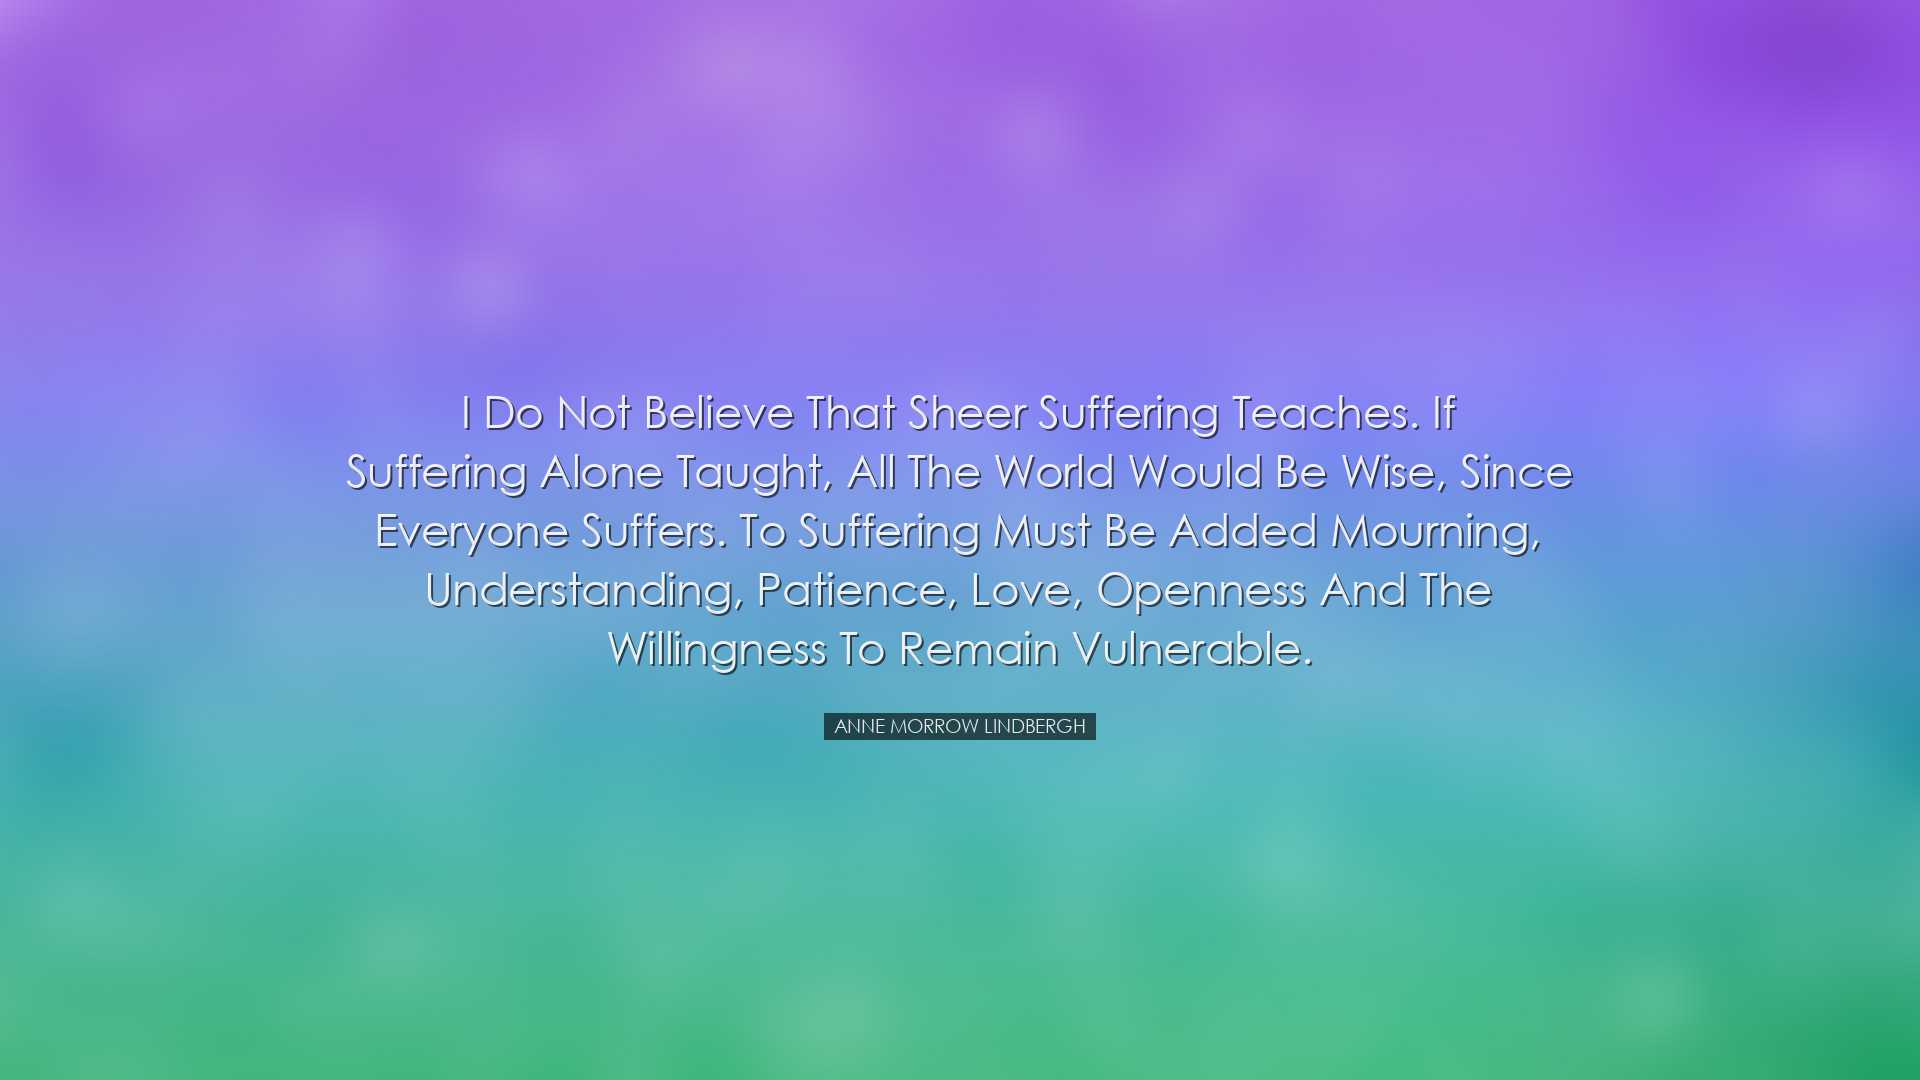 I do not believe that sheer suffering teaches. If suffering alone